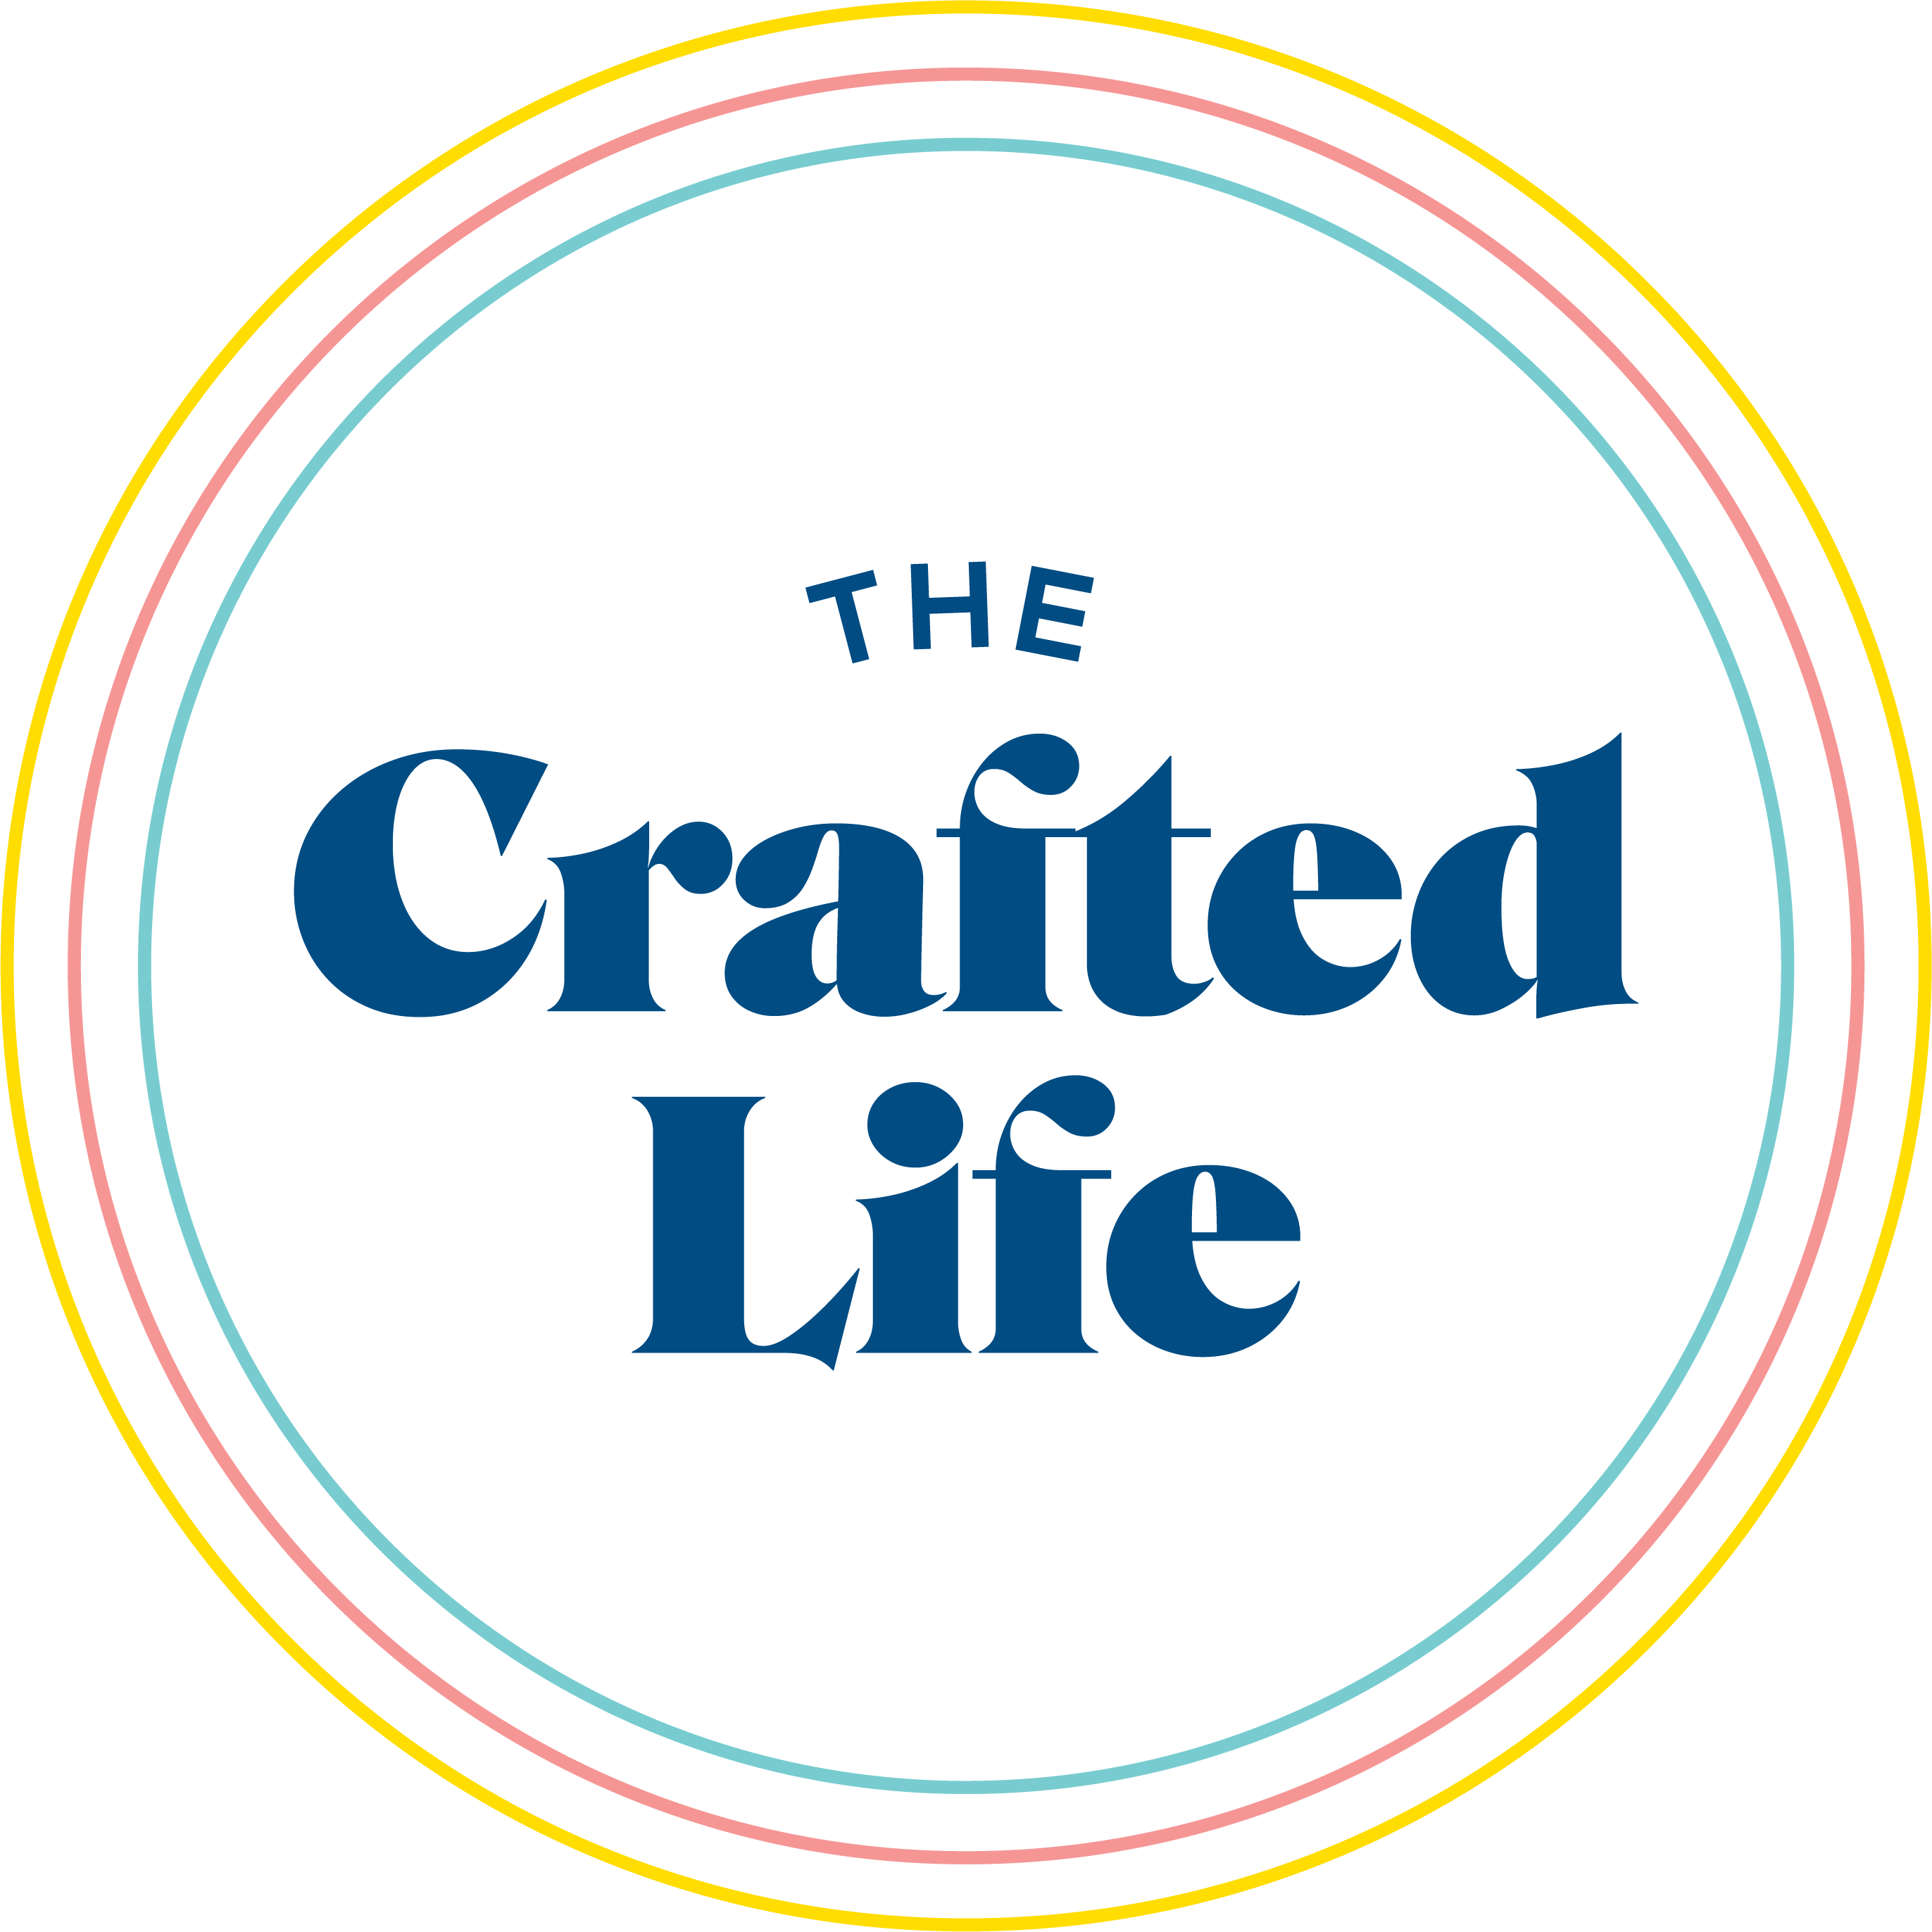 The Crafted Life